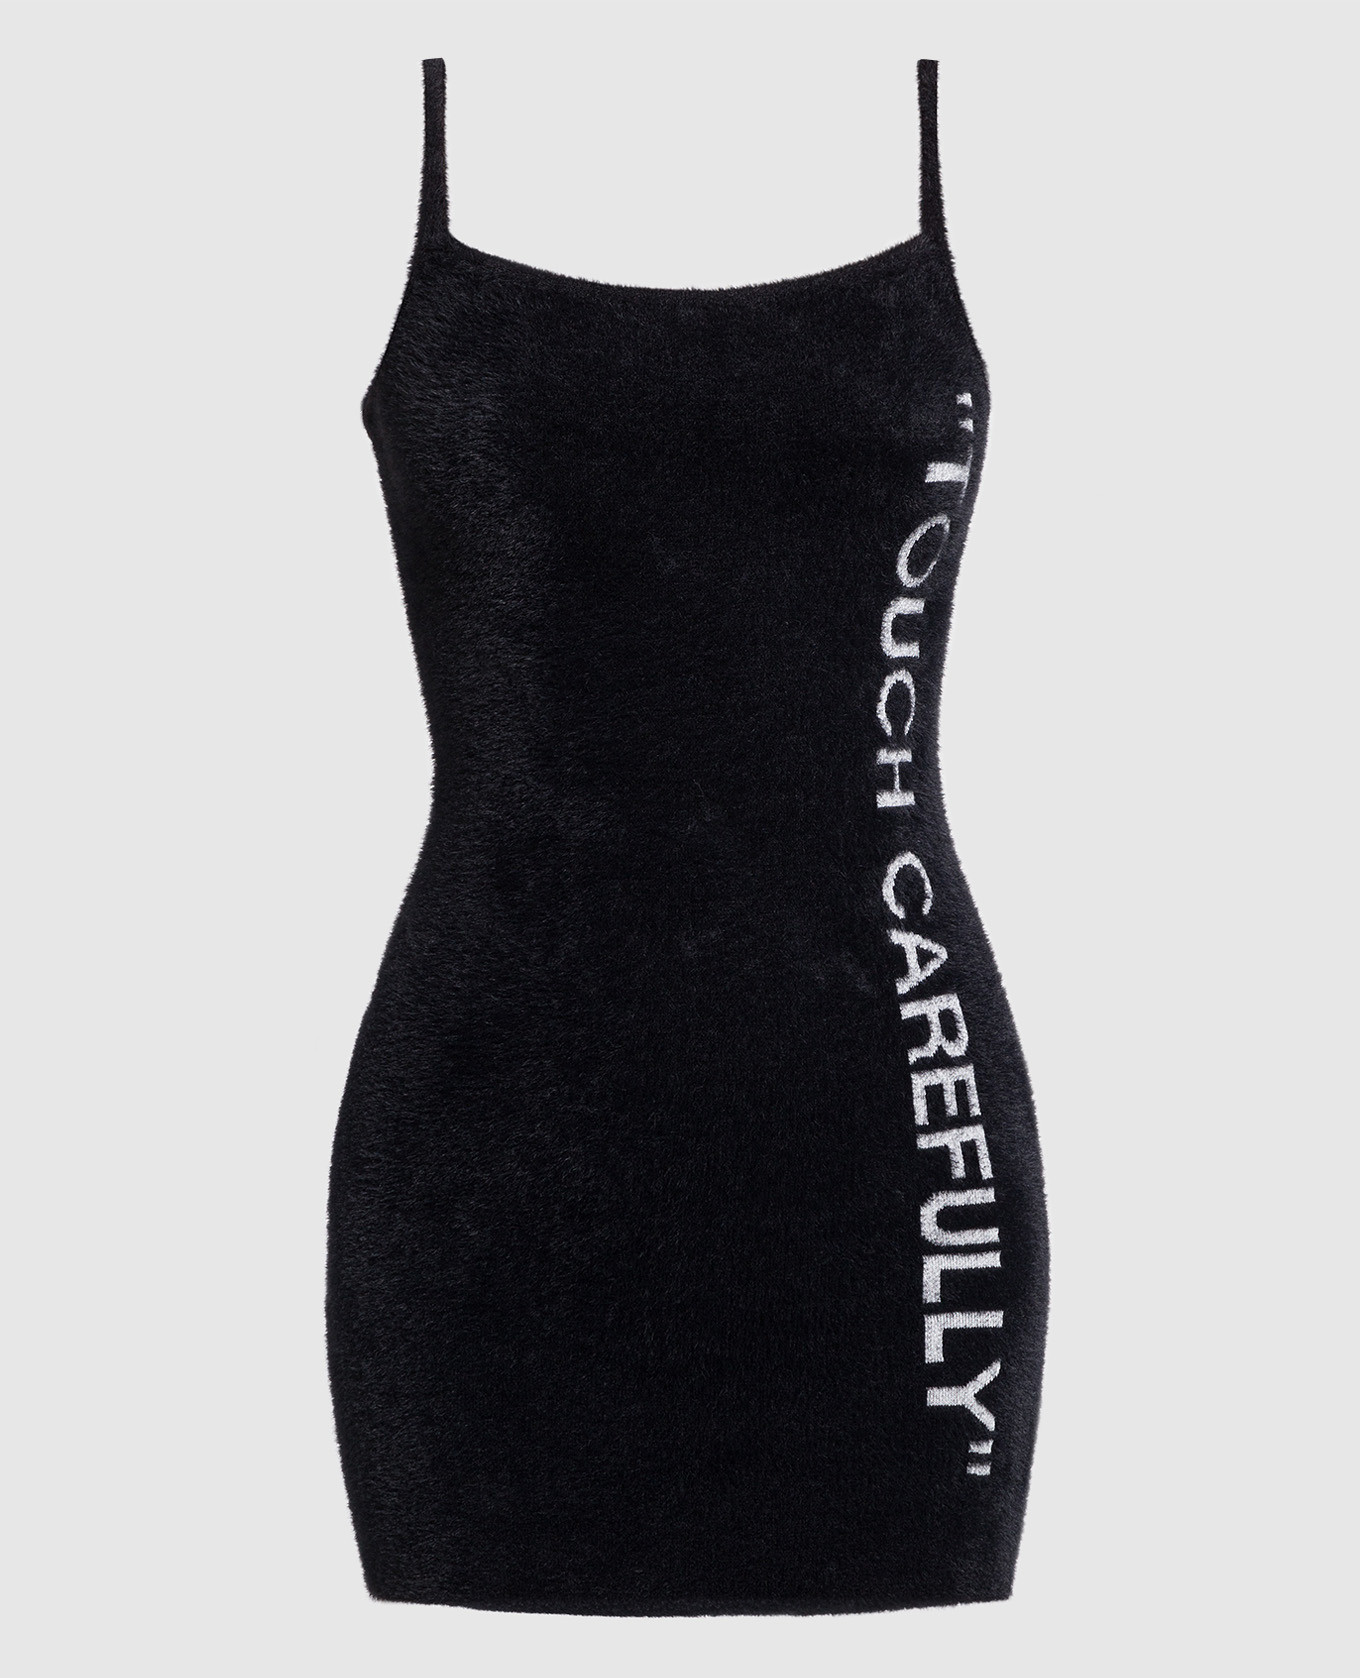 Black mini dress with contrasting inscription Touch carefully